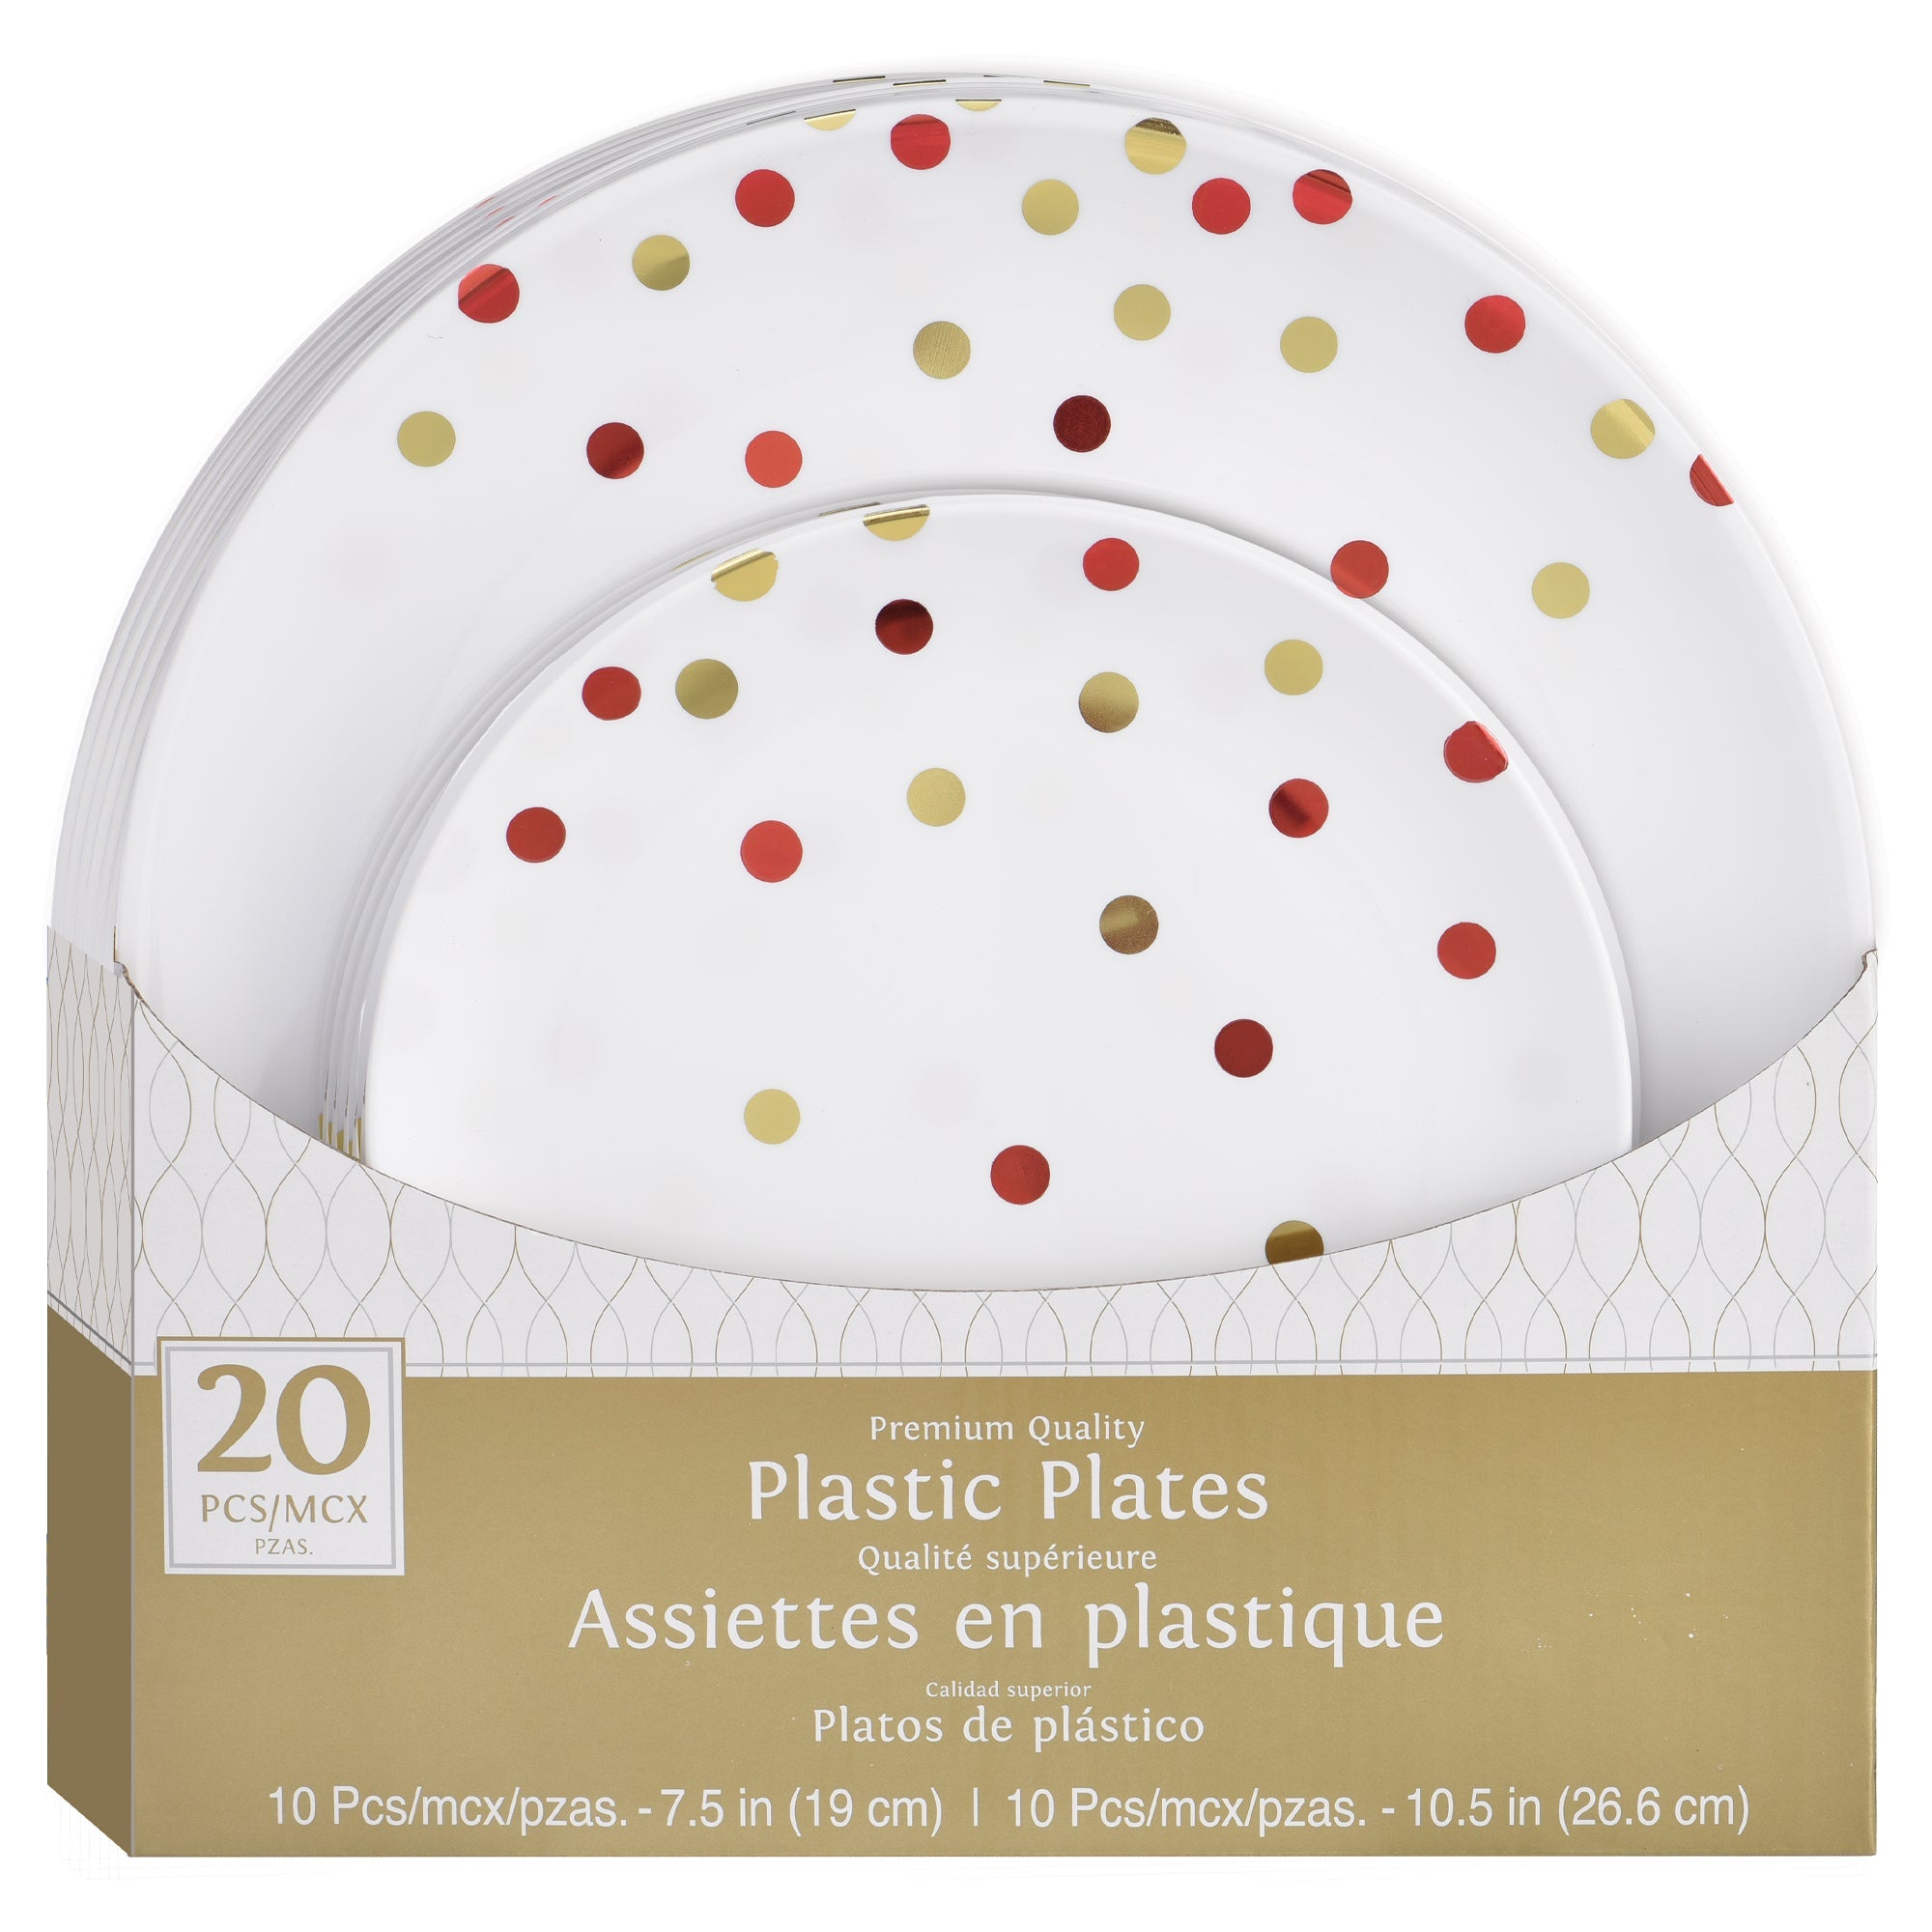 Plastic Plates  Premiun Quality  20 pcs  7.5in and 10.5in